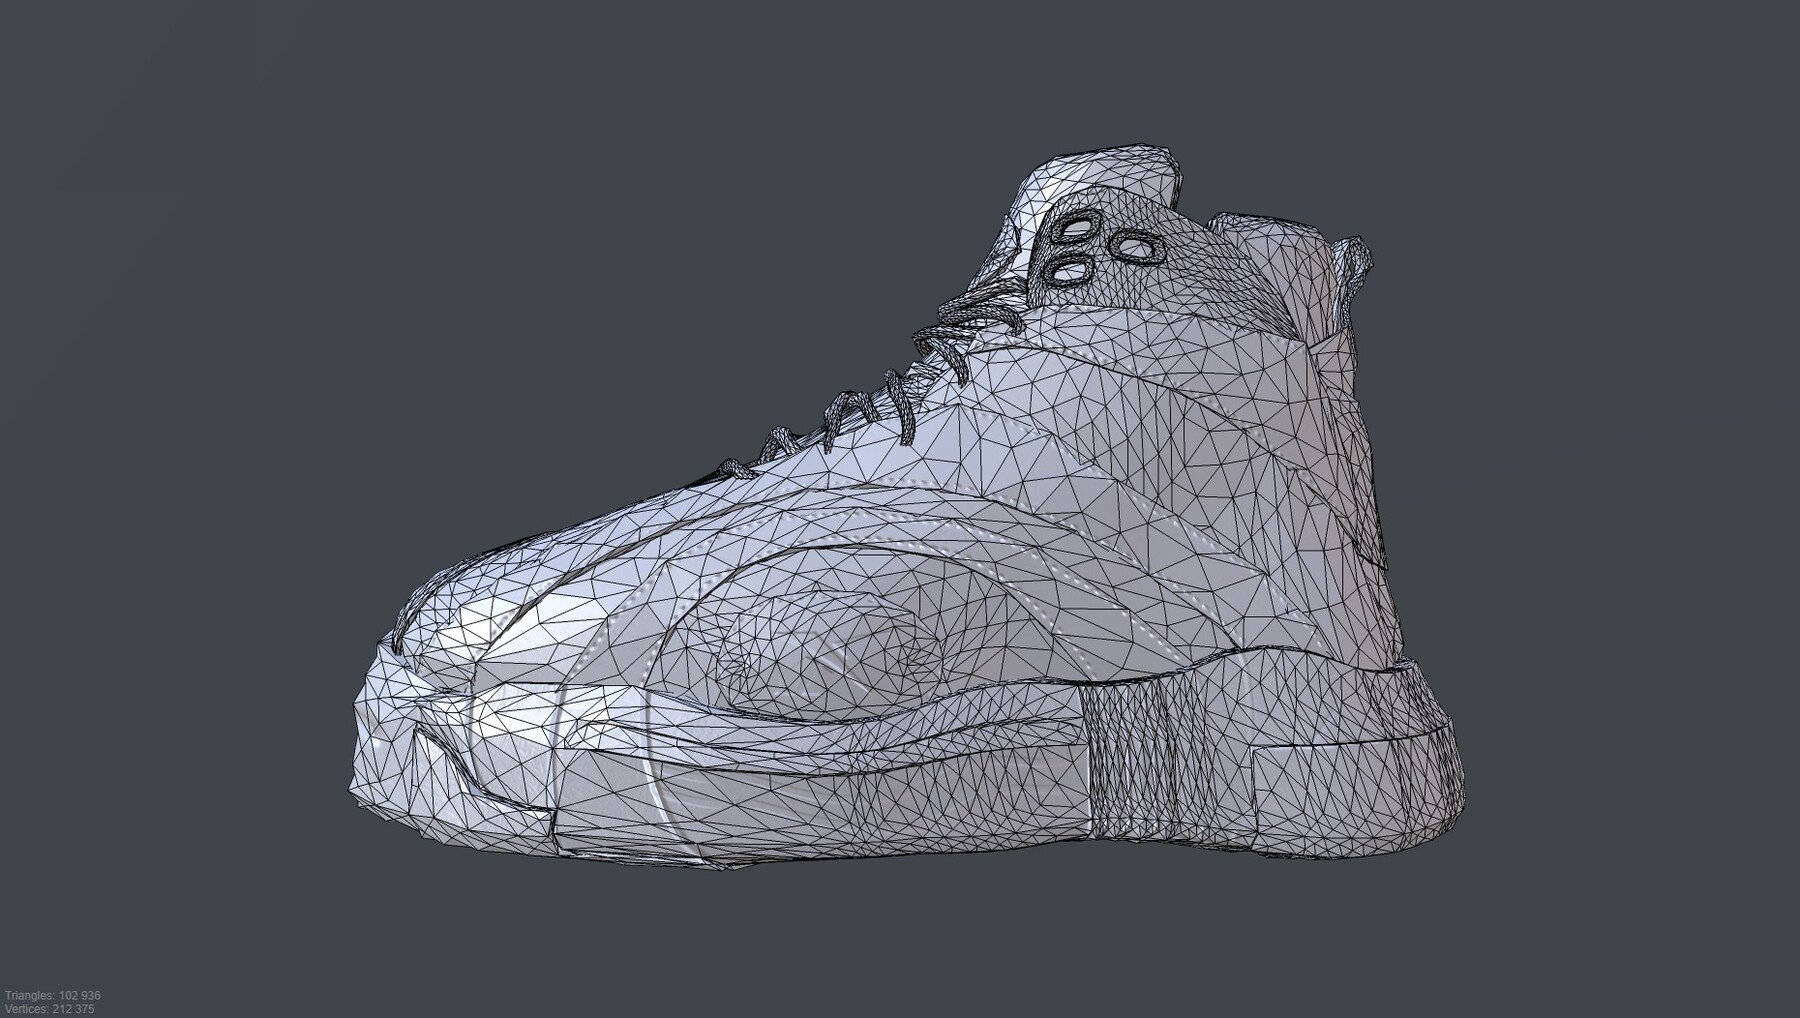 ArtStation - Reebok Shaqnosis Shoes Low-poly | Game Assets